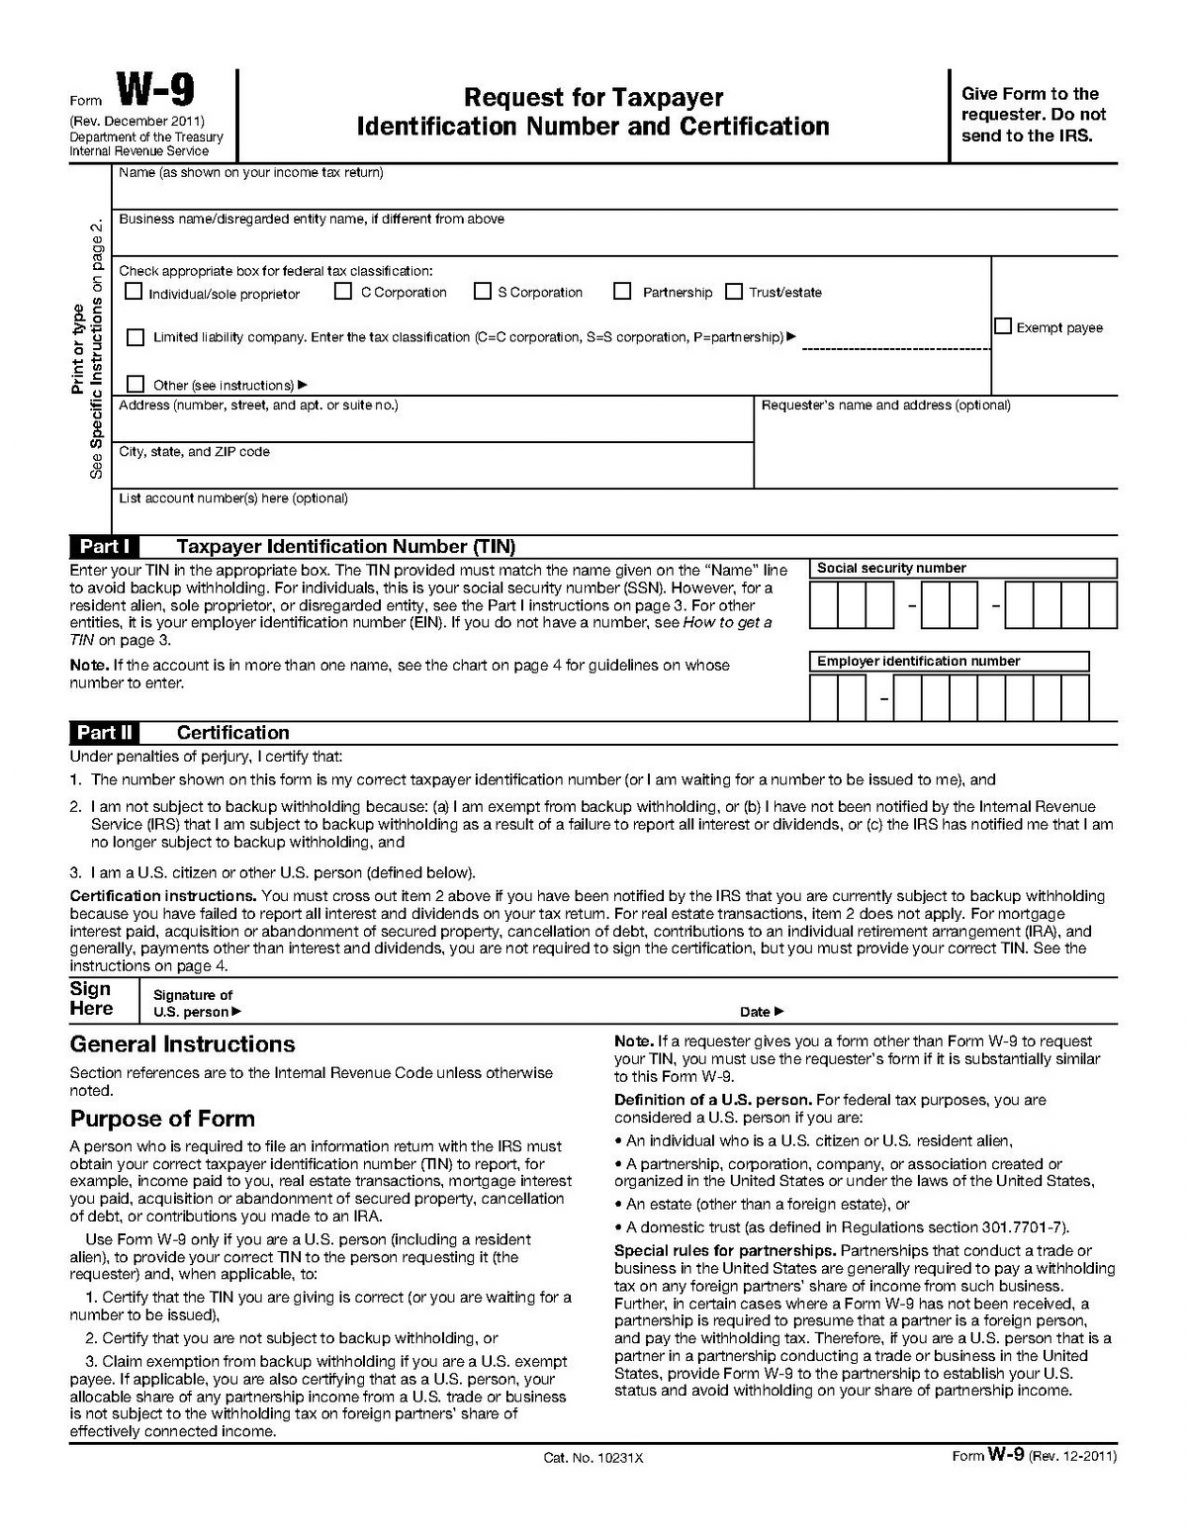 Free Printable W9 Form From Irs | W-9 Form Printable-Printable W 9 Form 2021 Irs